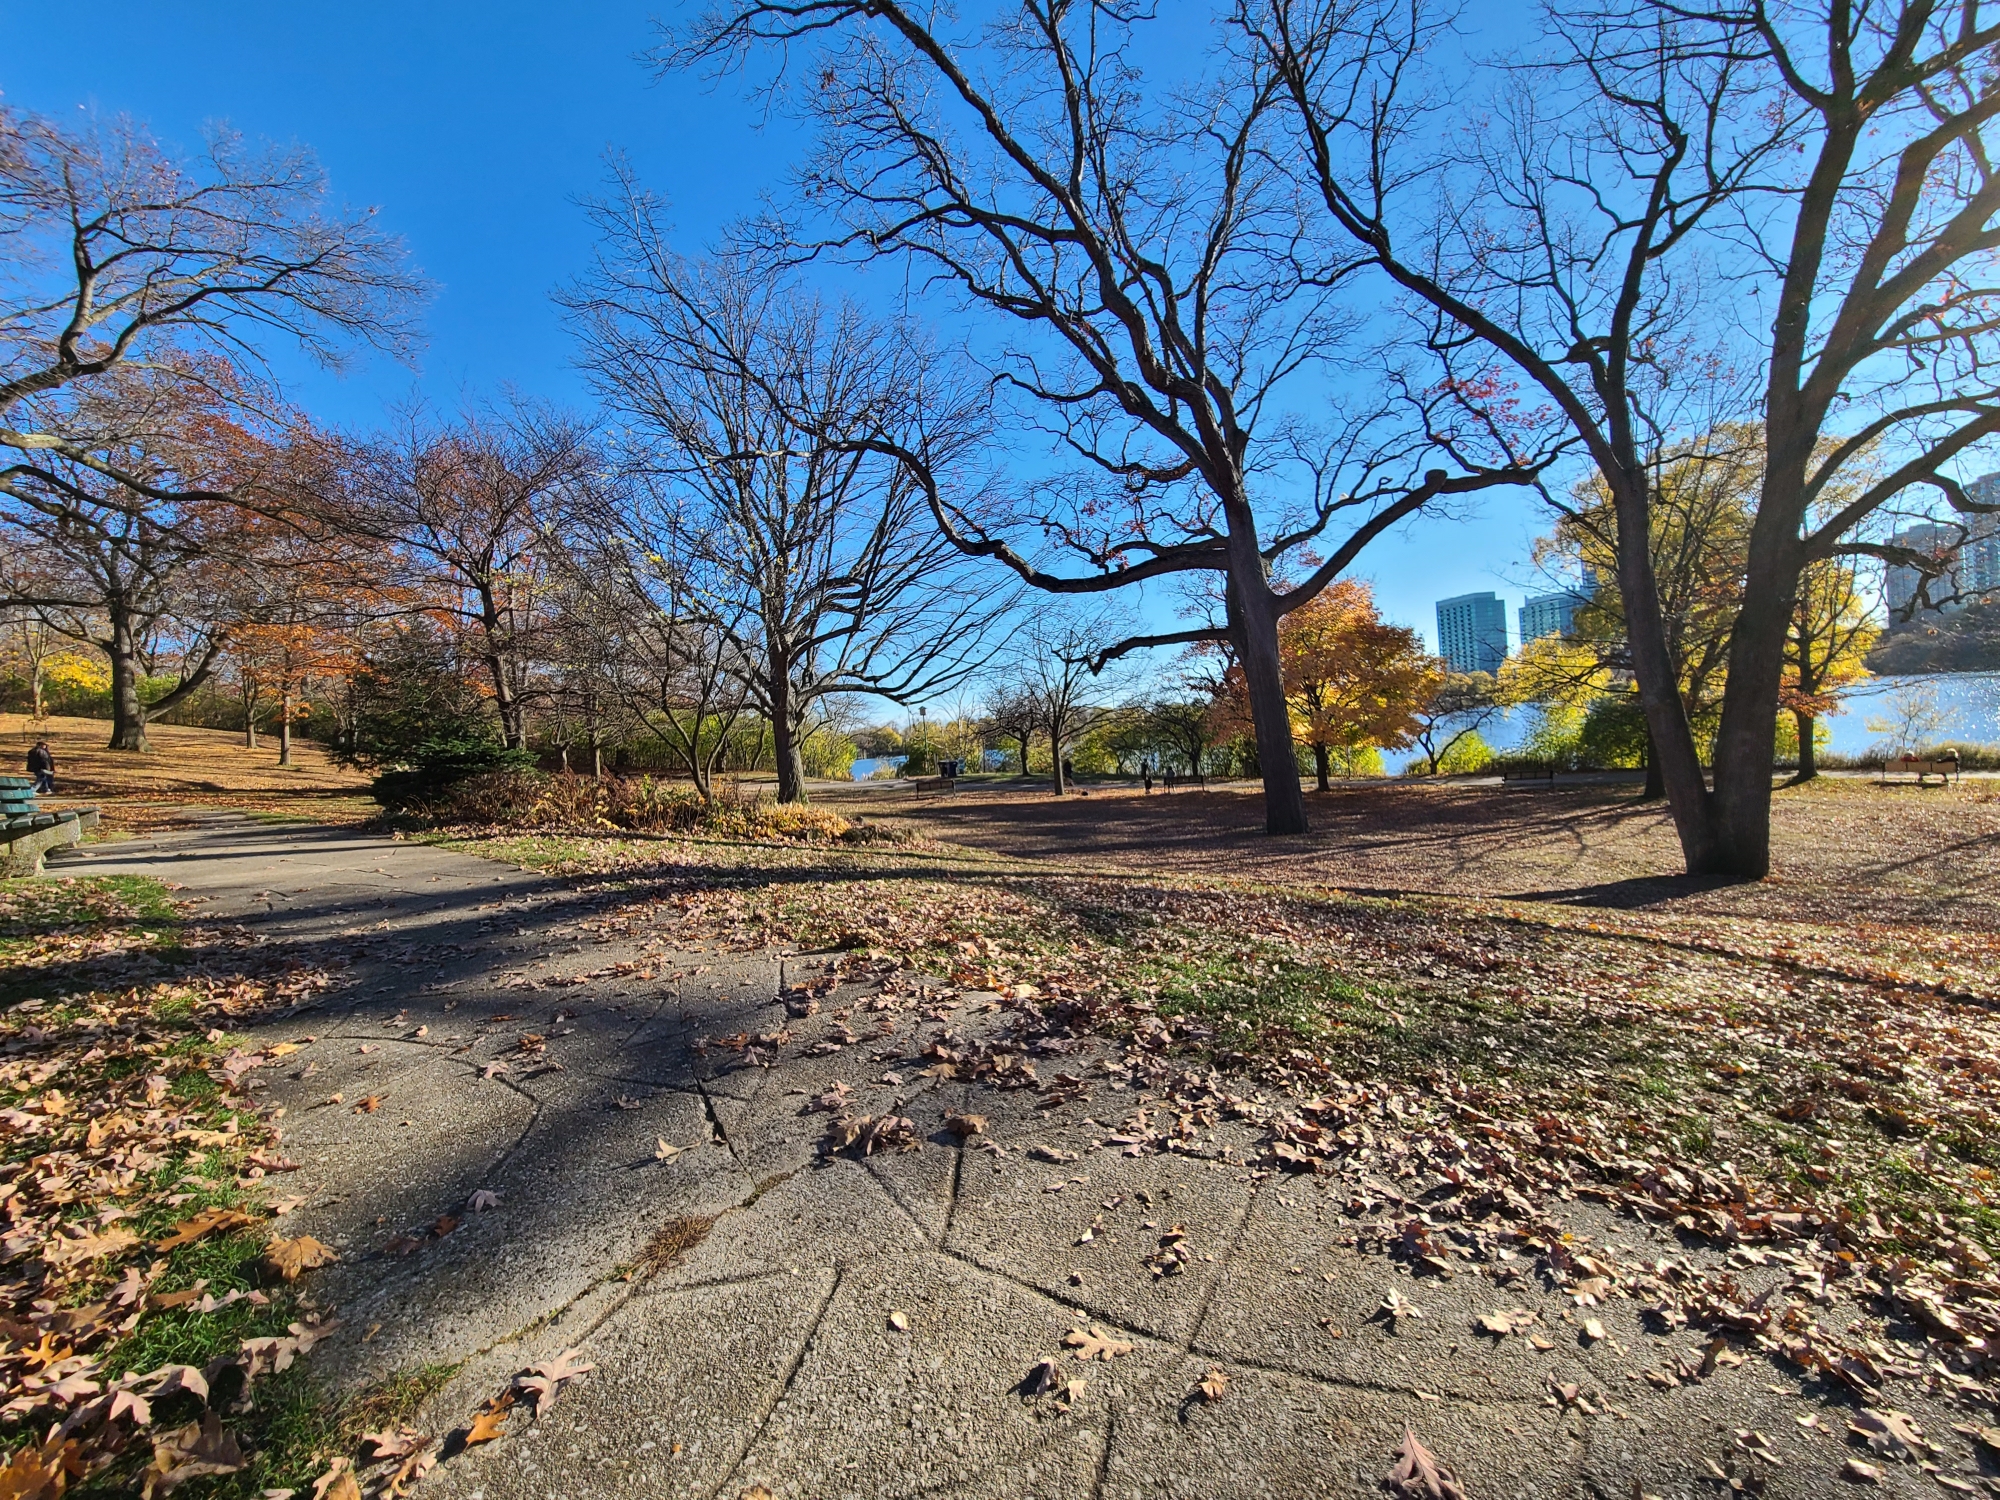 View in High Park by Grenadier Pond in early November in Toronto